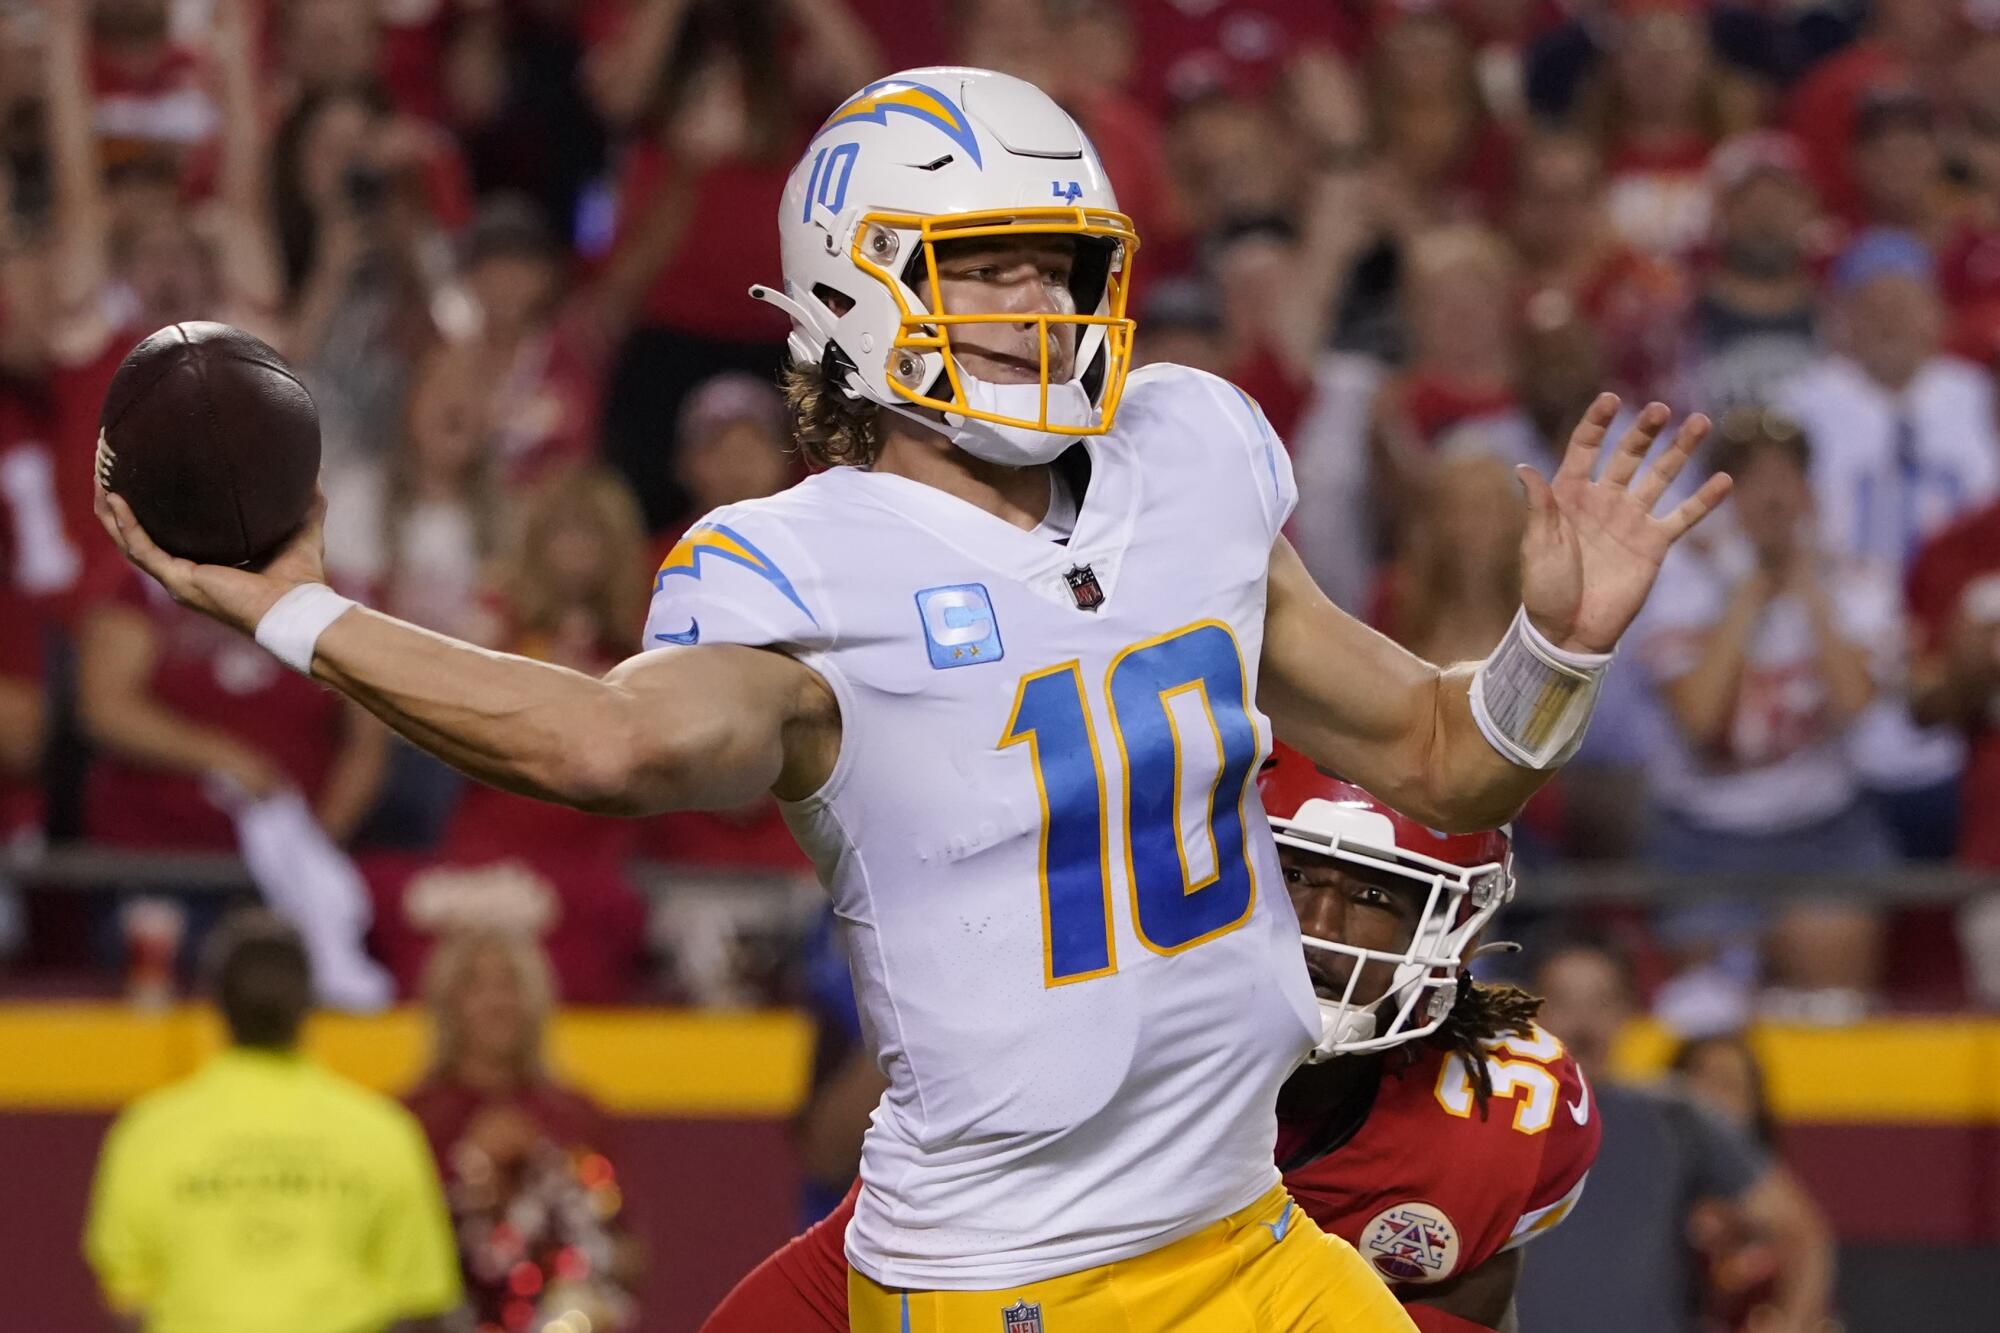 Week 15 NFL Saturday Night Football Chargers vs Chiefs: Live